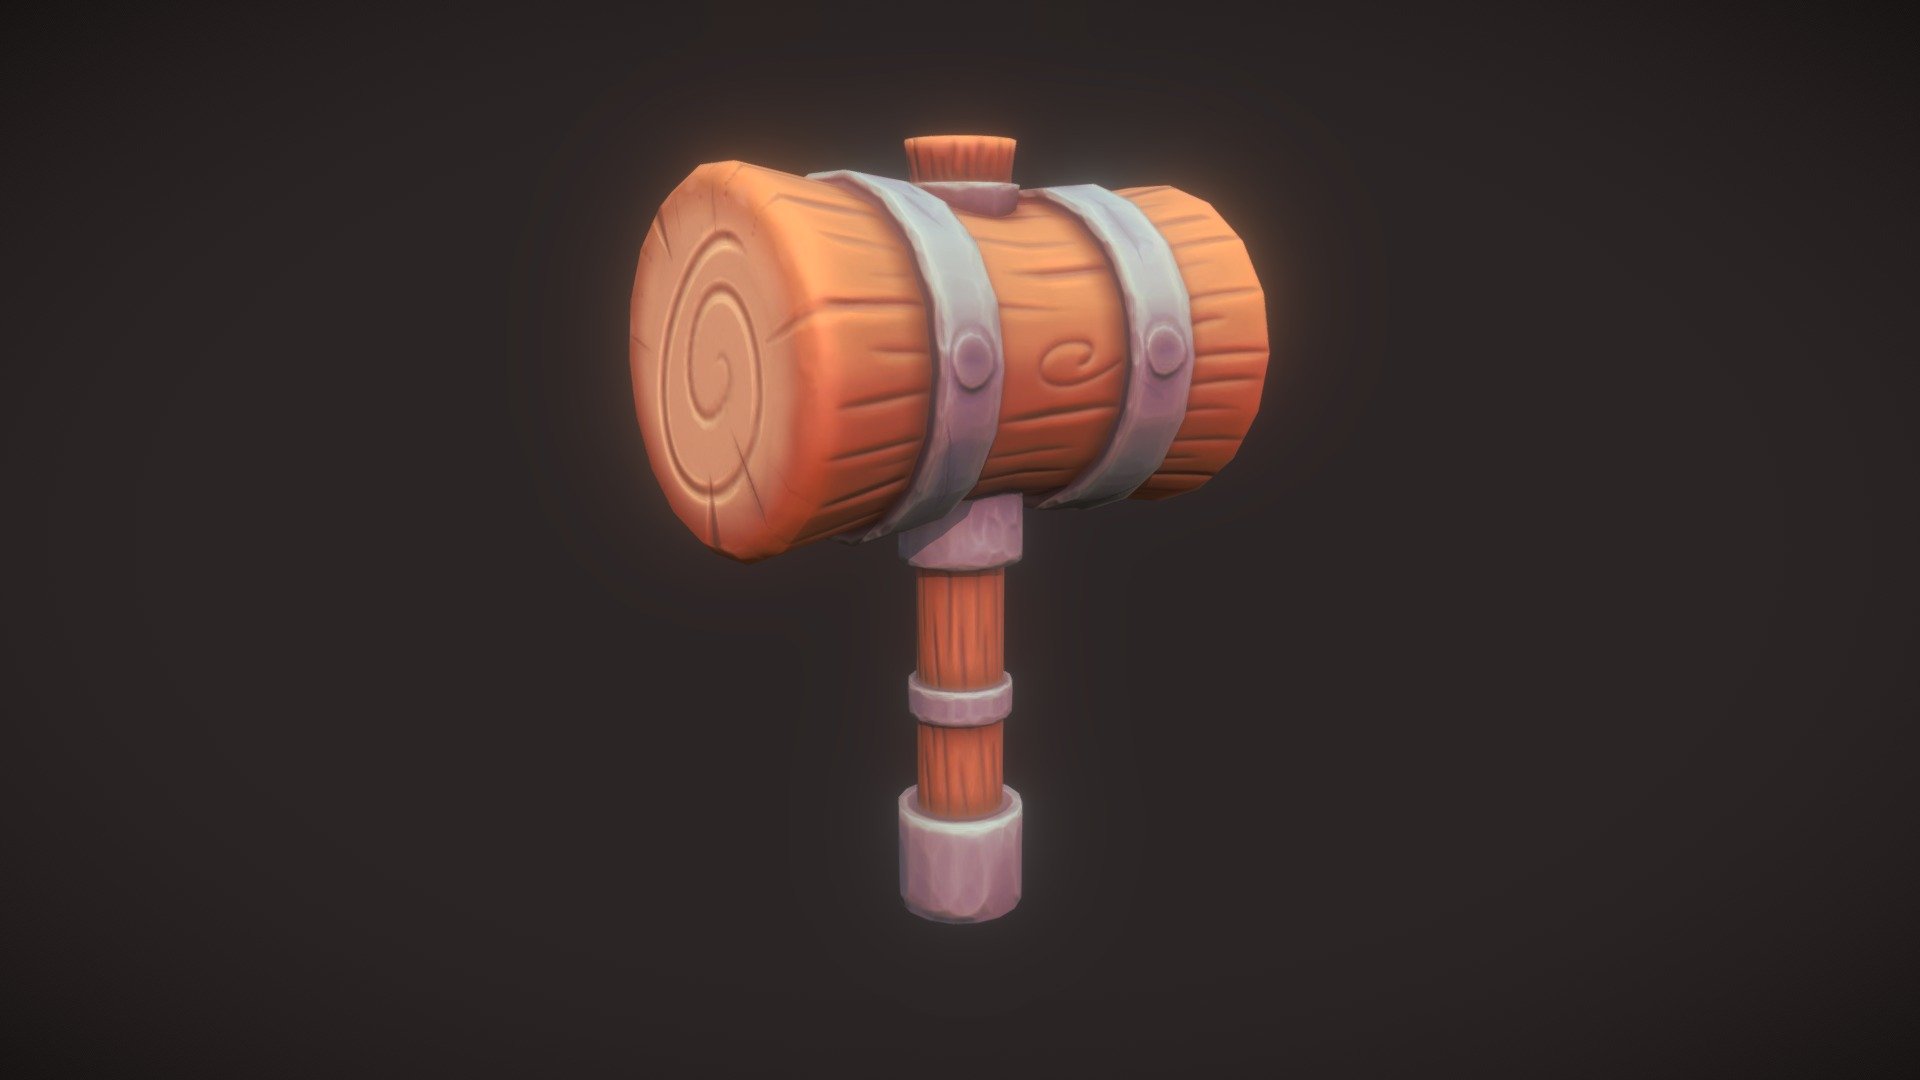 Stylized wooden hammer, modeled in Maya and Zbrush and textured in Substance Painter. This model is game ready and compatible with Unreal Engine and Unity 3D.

File Formats:

OBJ
FBX

Texture resolutions:

512x512
1024x1024
2048x2048

Texture Formats:

Base Colour
Metallic
Roughness
Normal
Ambient Occlusion
https://martynagrek.artstation.com/ - Wooden Hammer - Buy Royalty Free 3D model by MartynaGrek 3d model